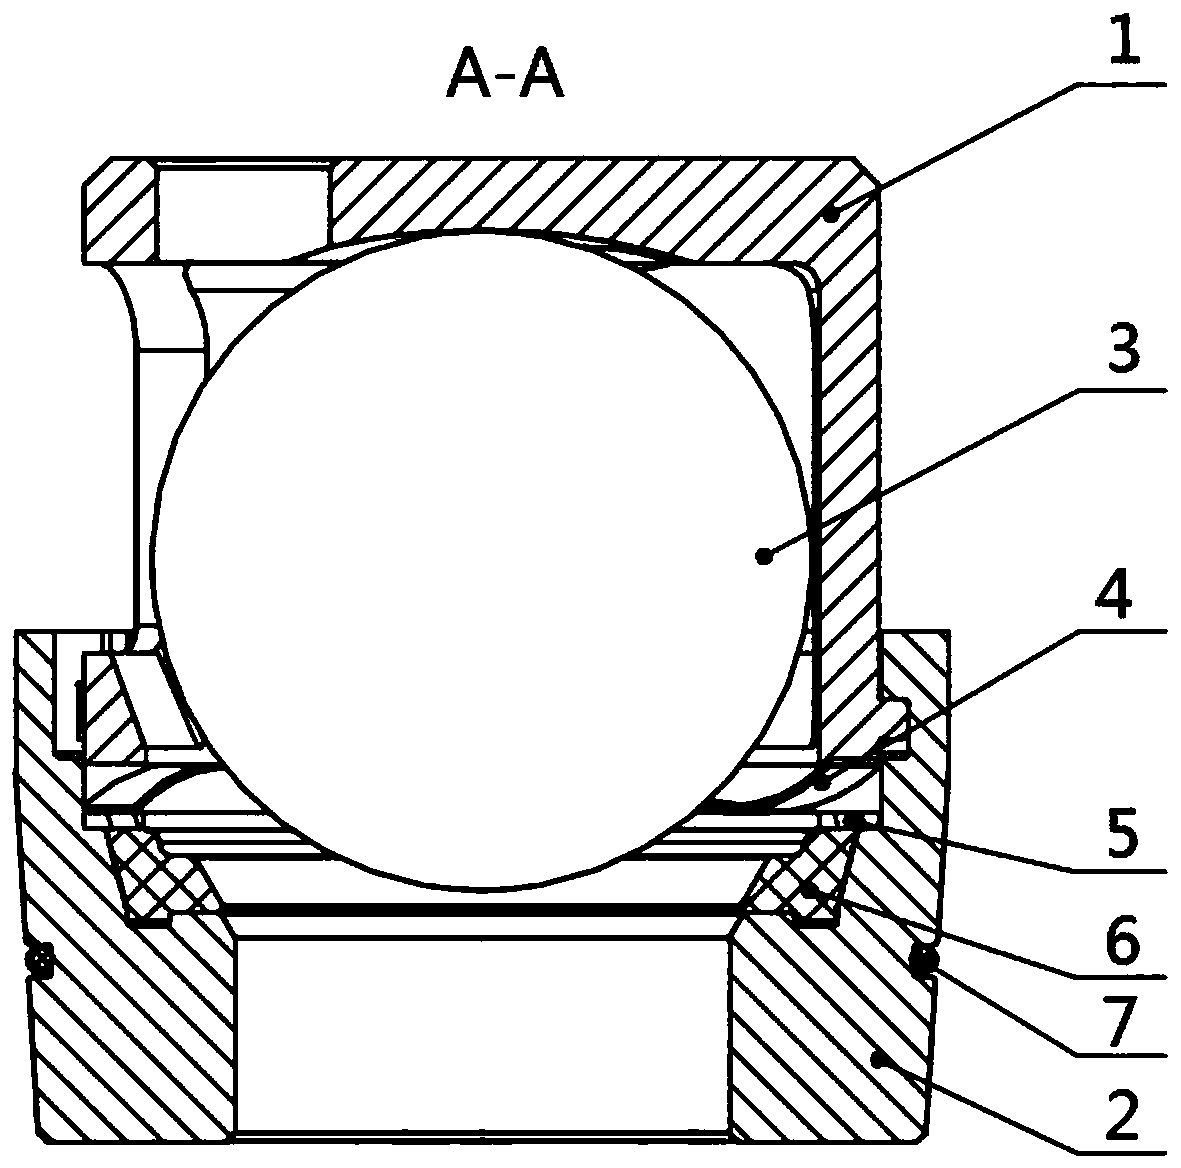 Ball-type valve assembly structure